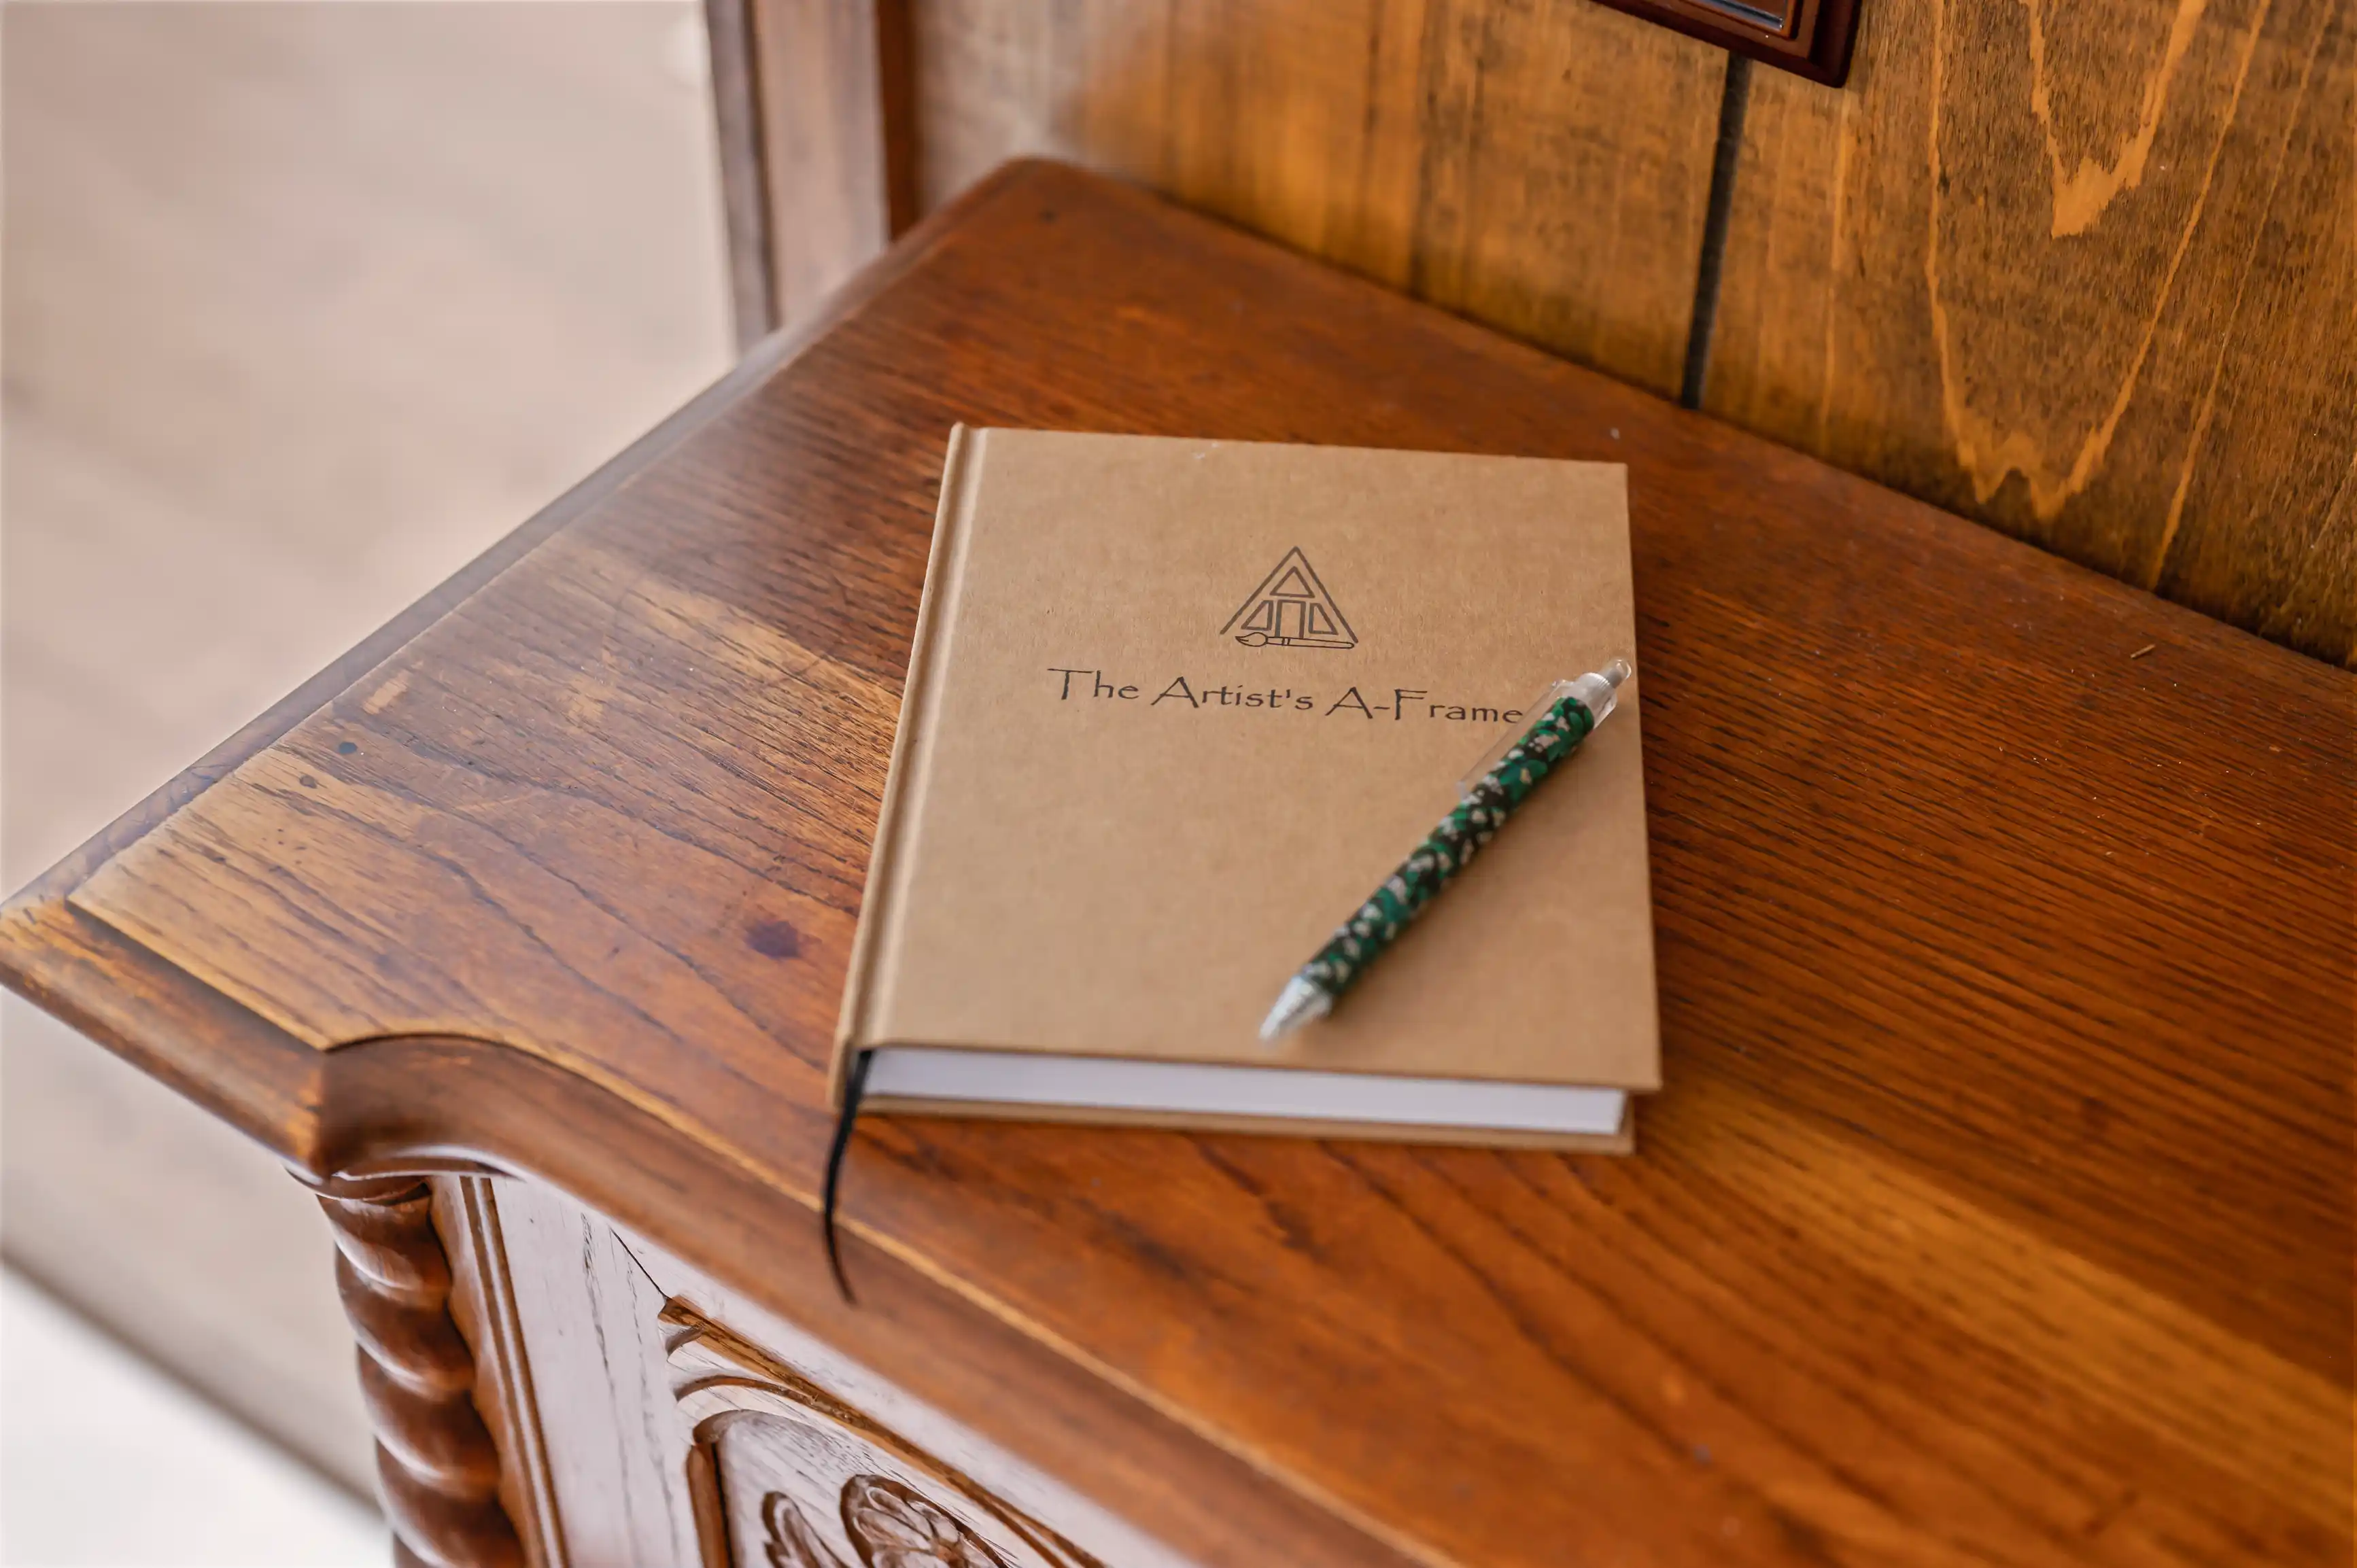 A closed book titled "The Artist's A-Frame" with a logo on the cover next to a patterned pencil, resting on a wooden surface beside an ornate piece of furniture.